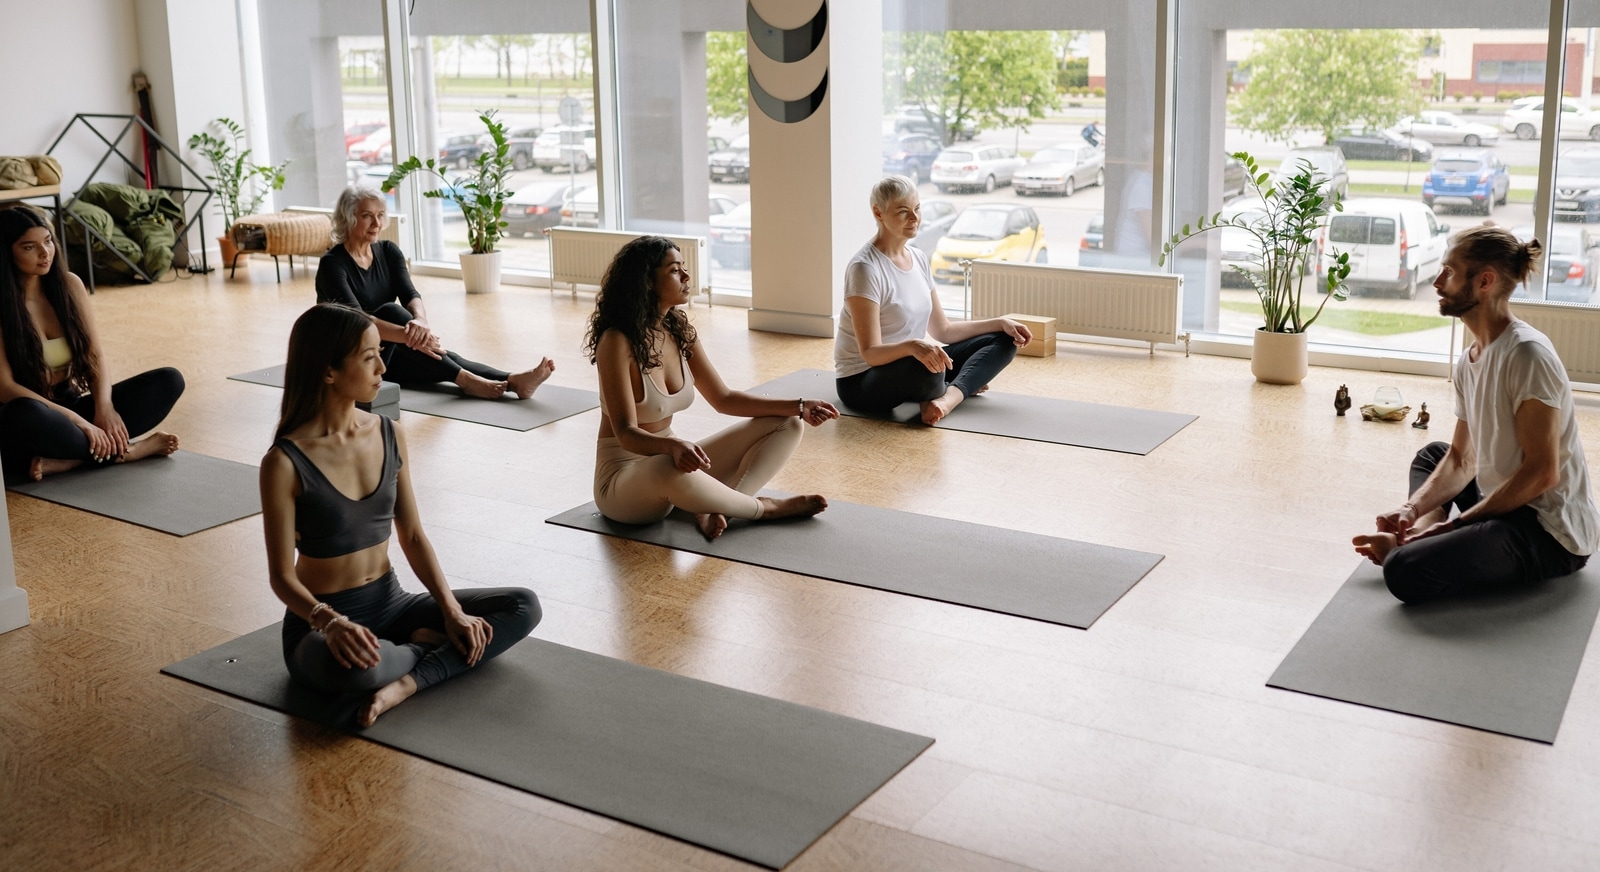 Opening a yoga studio: costs, the perfect size, staffing